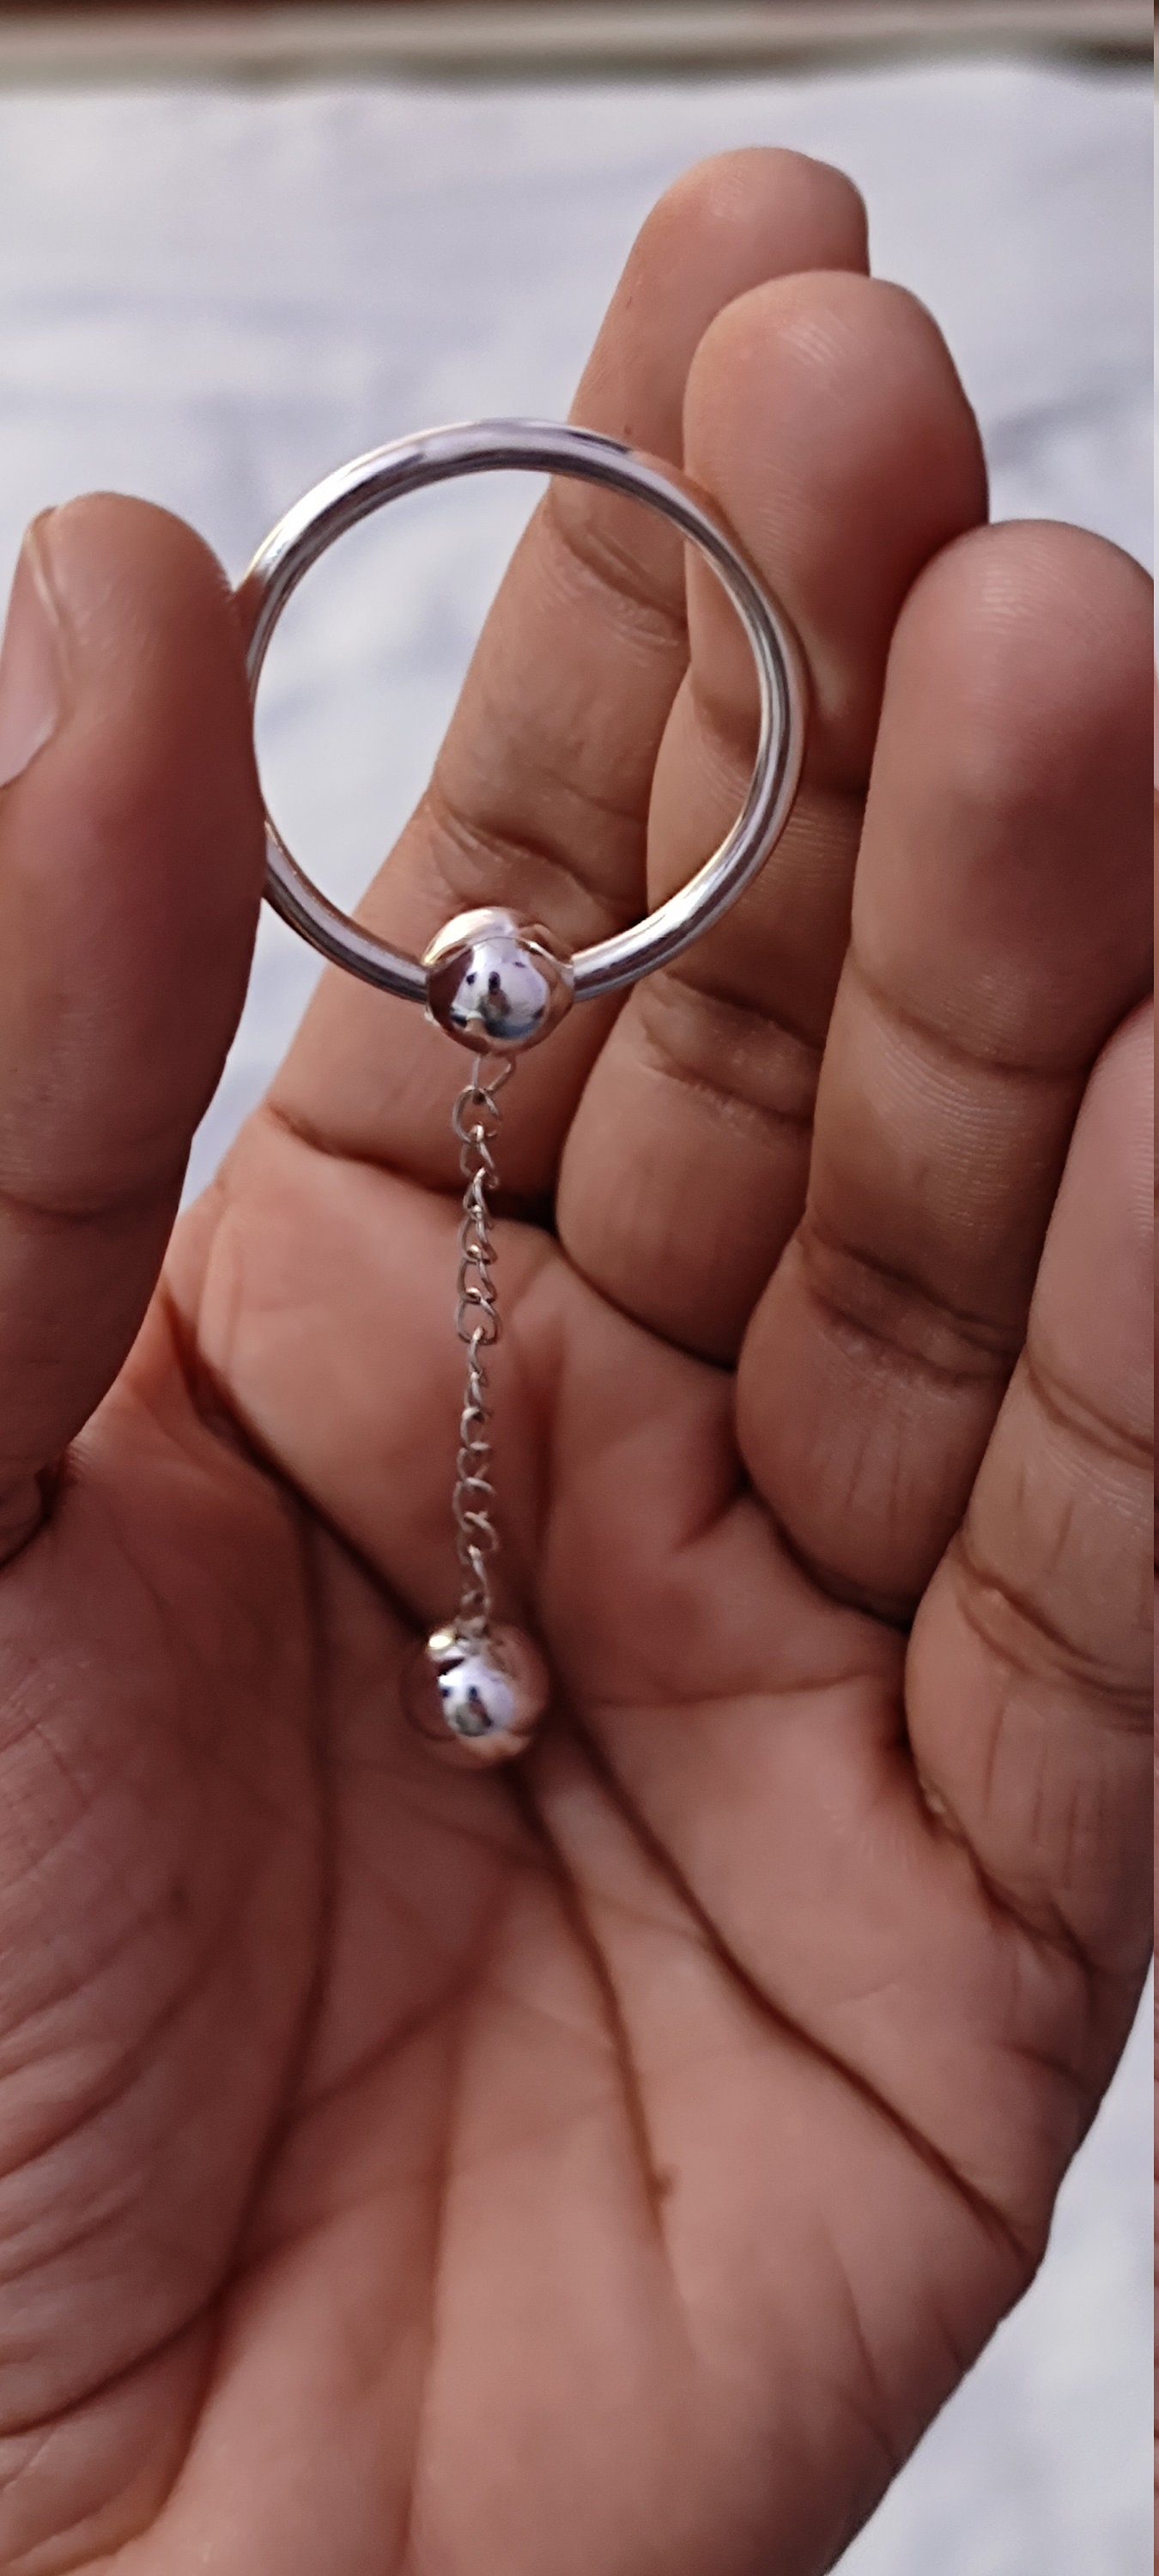 Penis Jewelry  Only at Cum Swing With Me